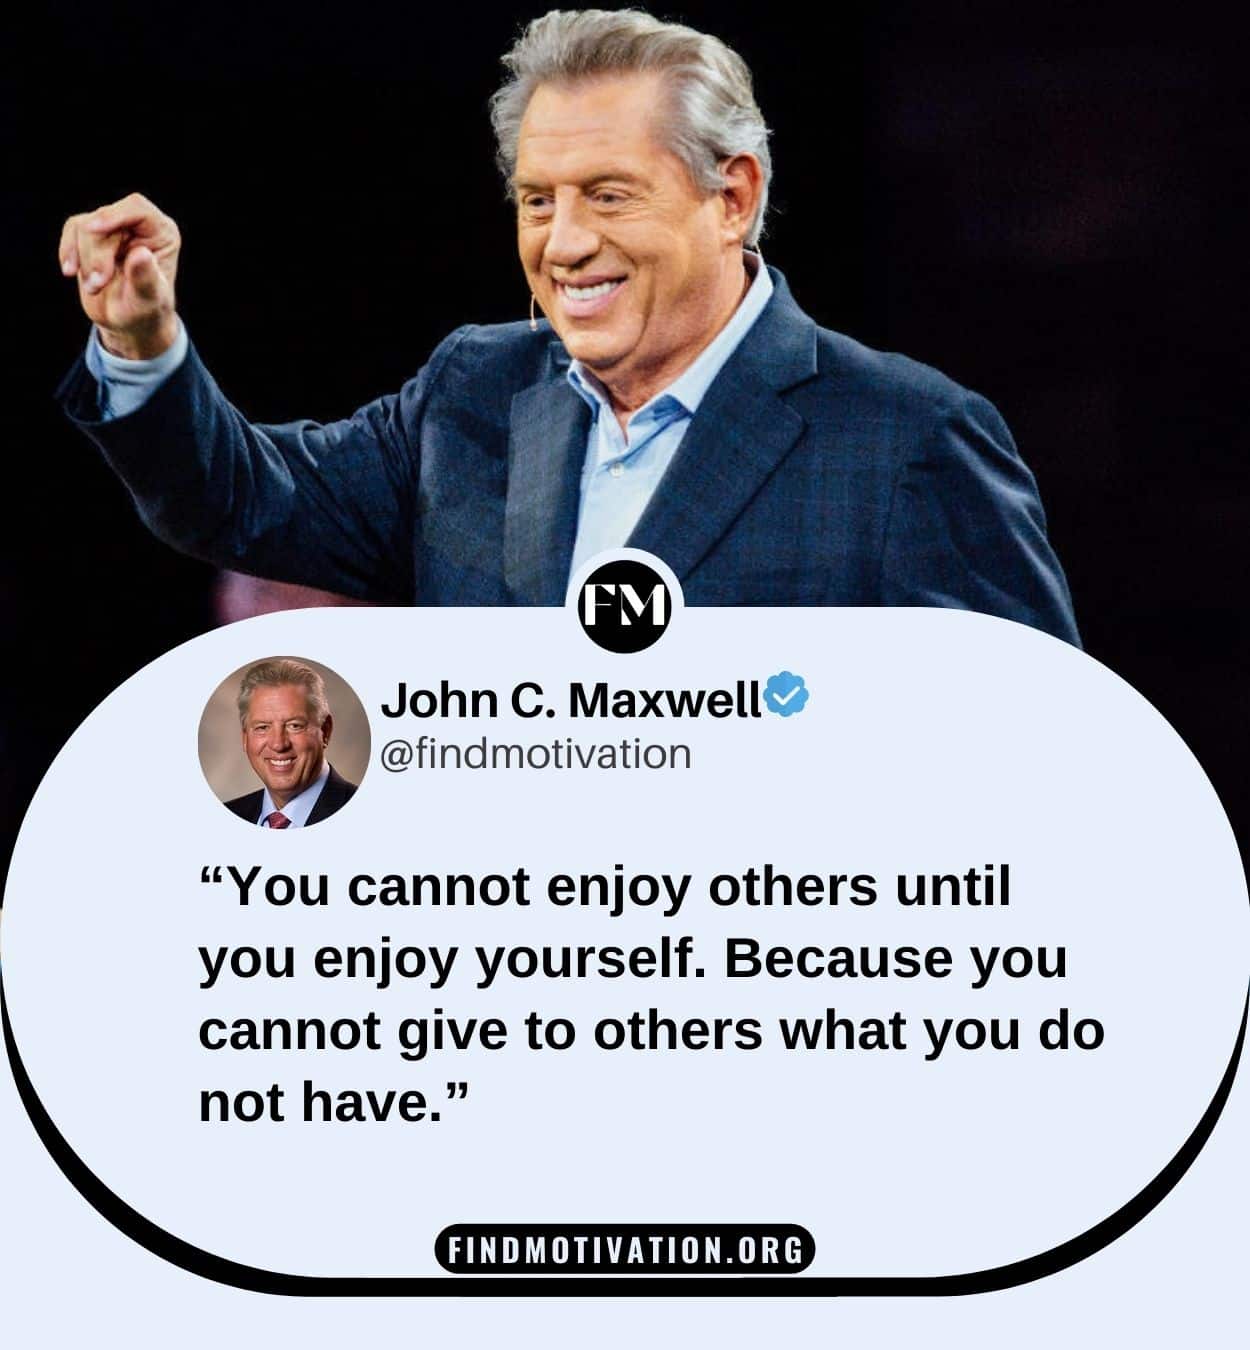 John C Maxwell Self-Improvement Quotes to change yourself and become the better version of yourself